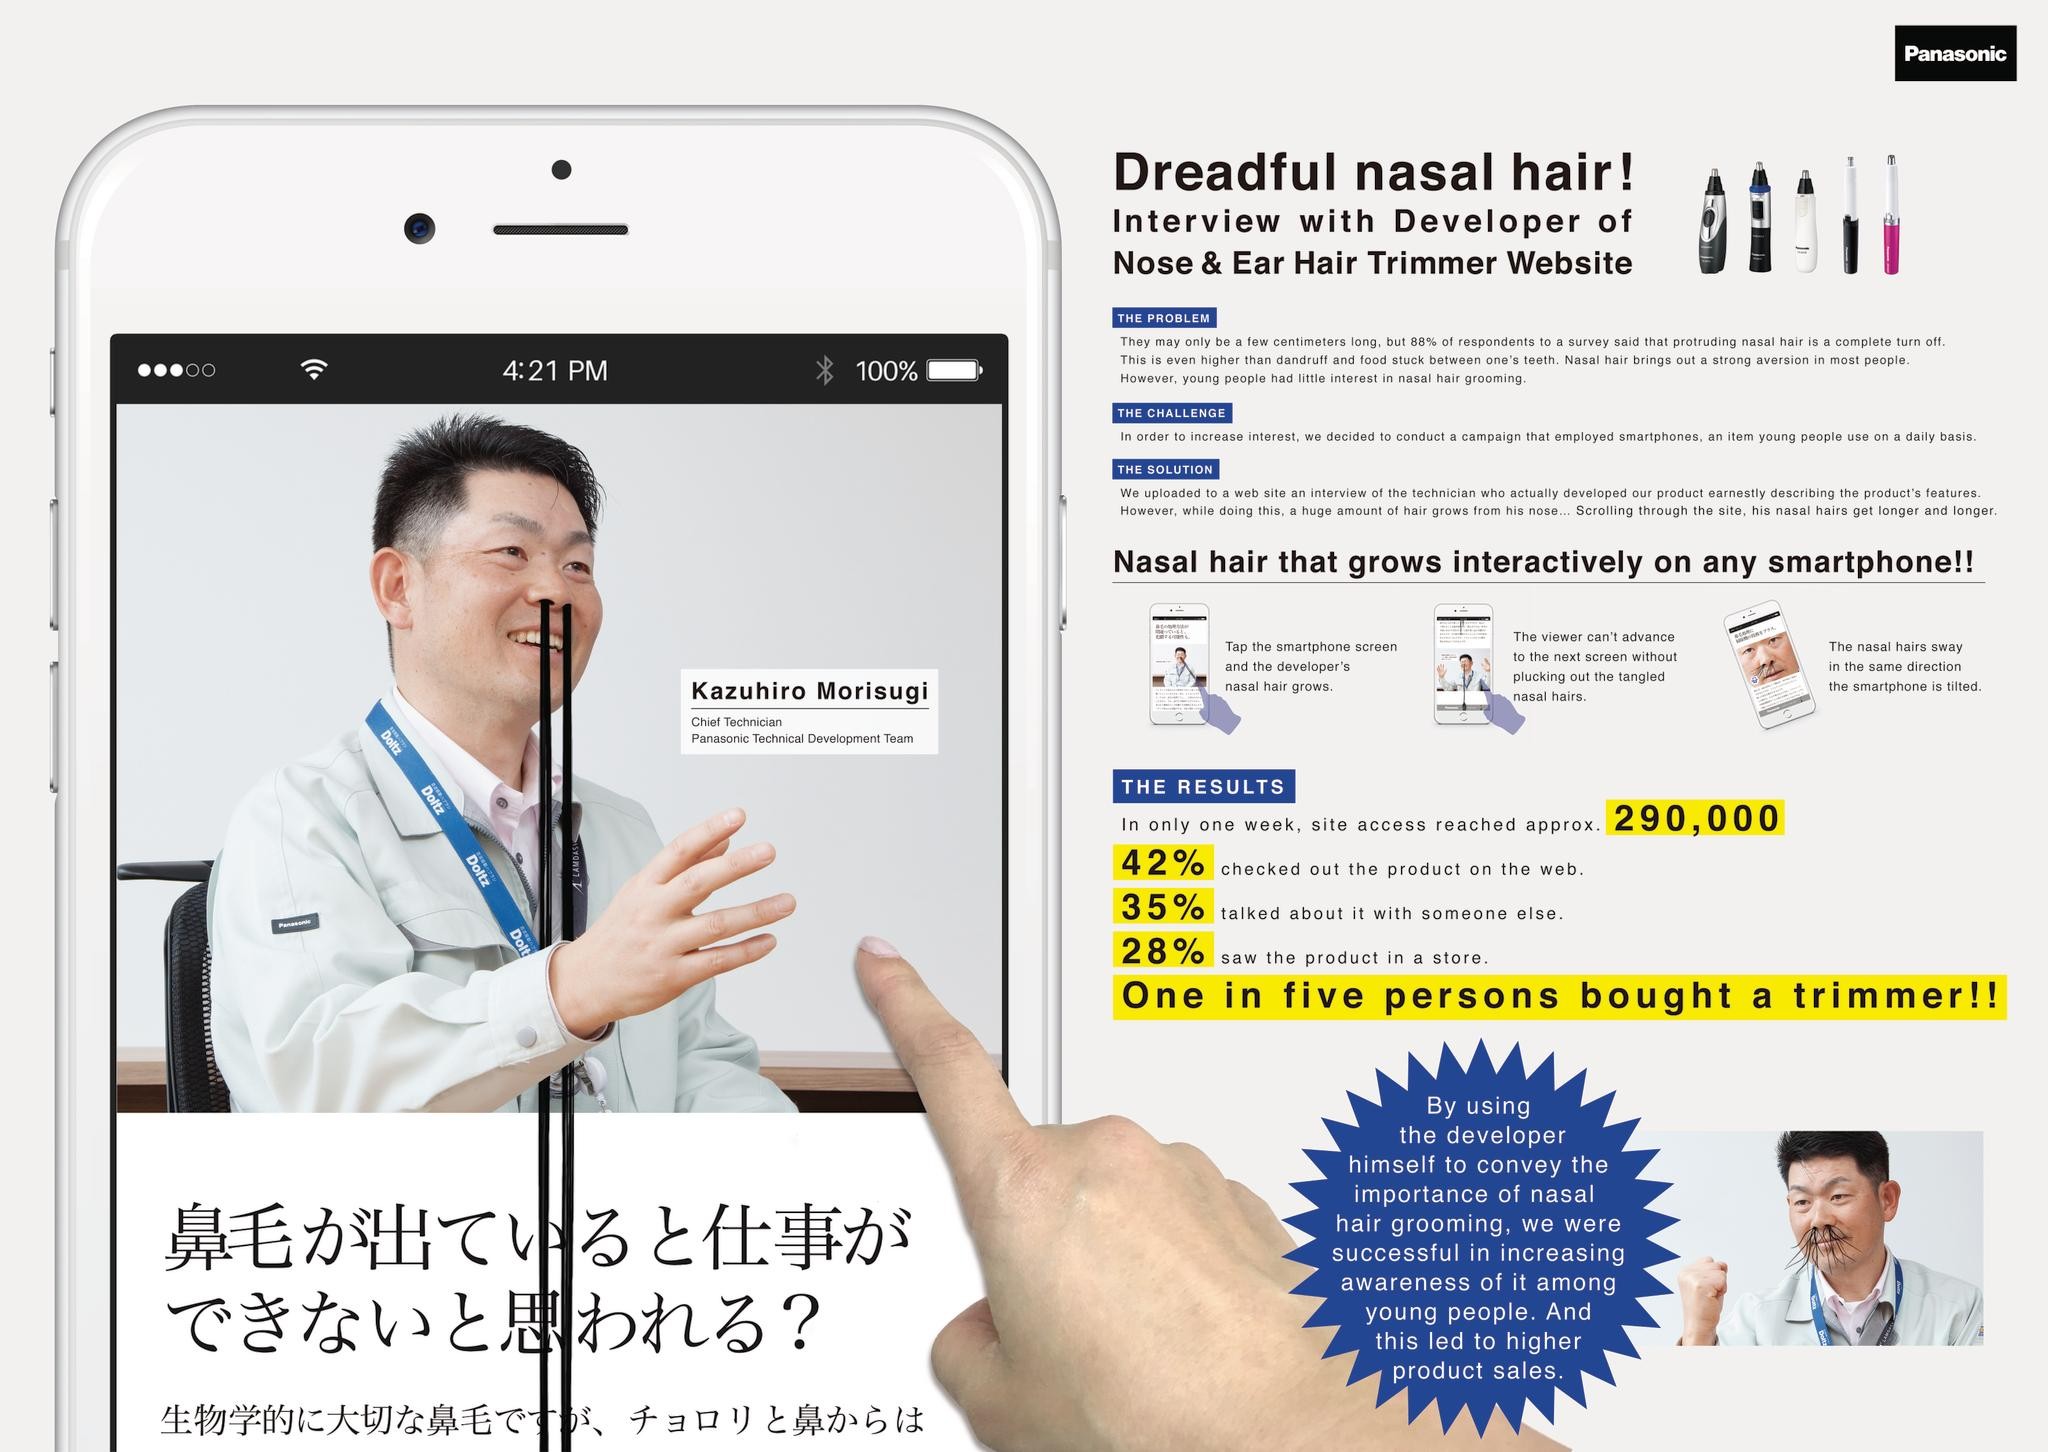 Interview with Developer of Nose & Ear Hair Trimmer Website